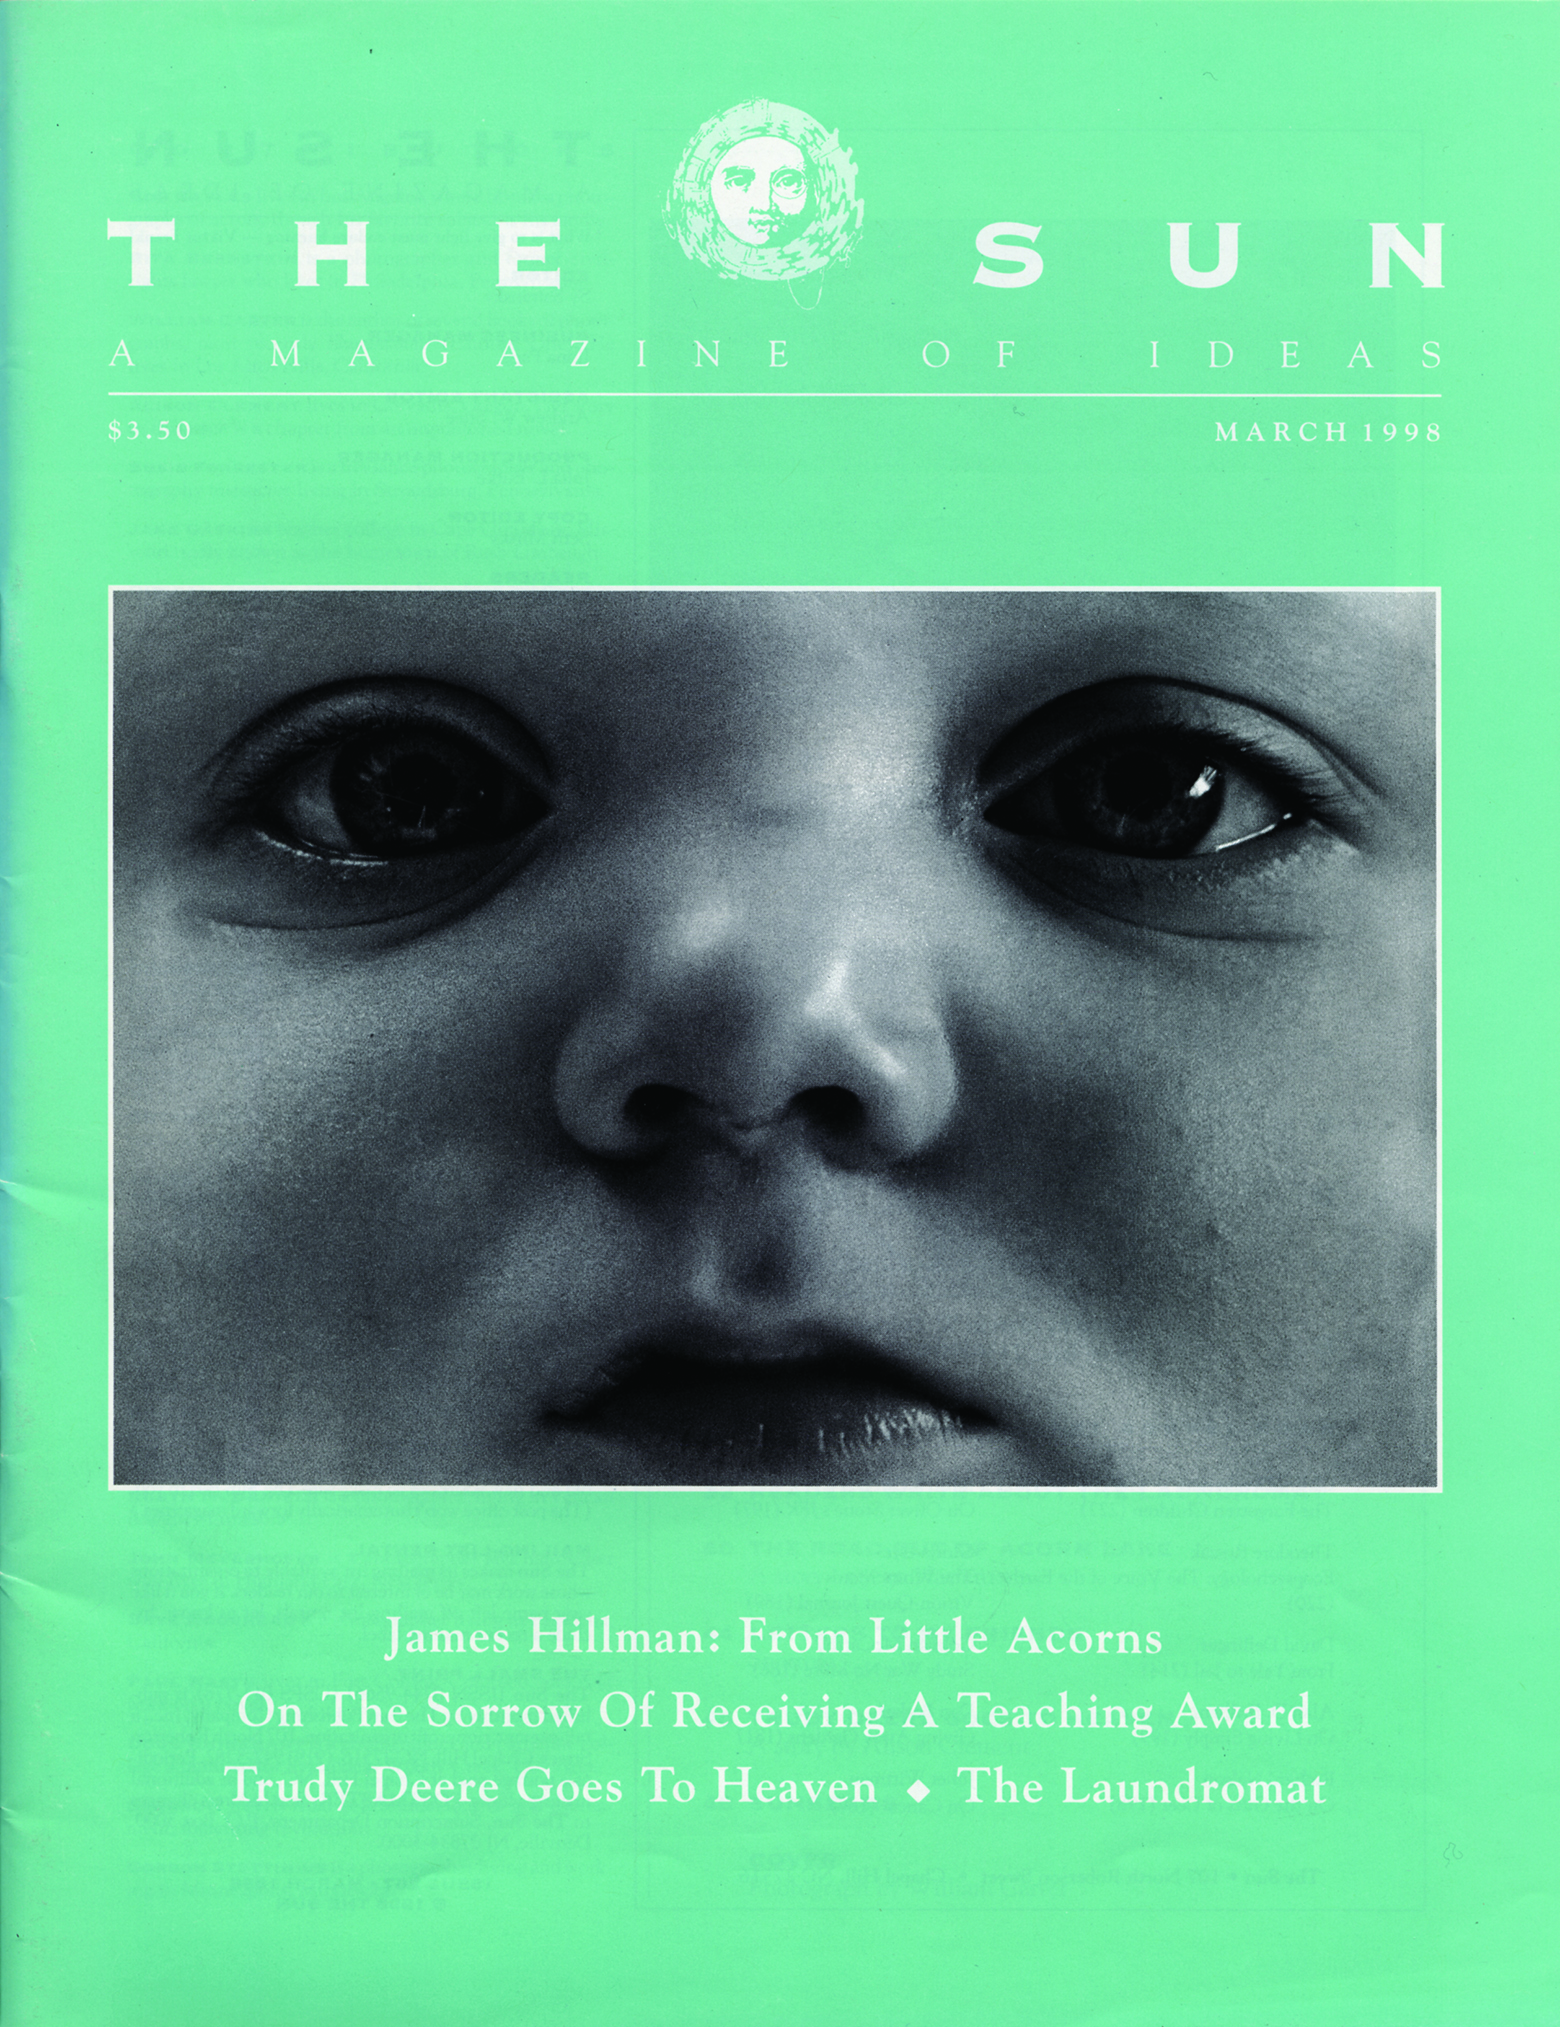 March 1998 cover of The Sun. An extreme close-up of a baby’s face.